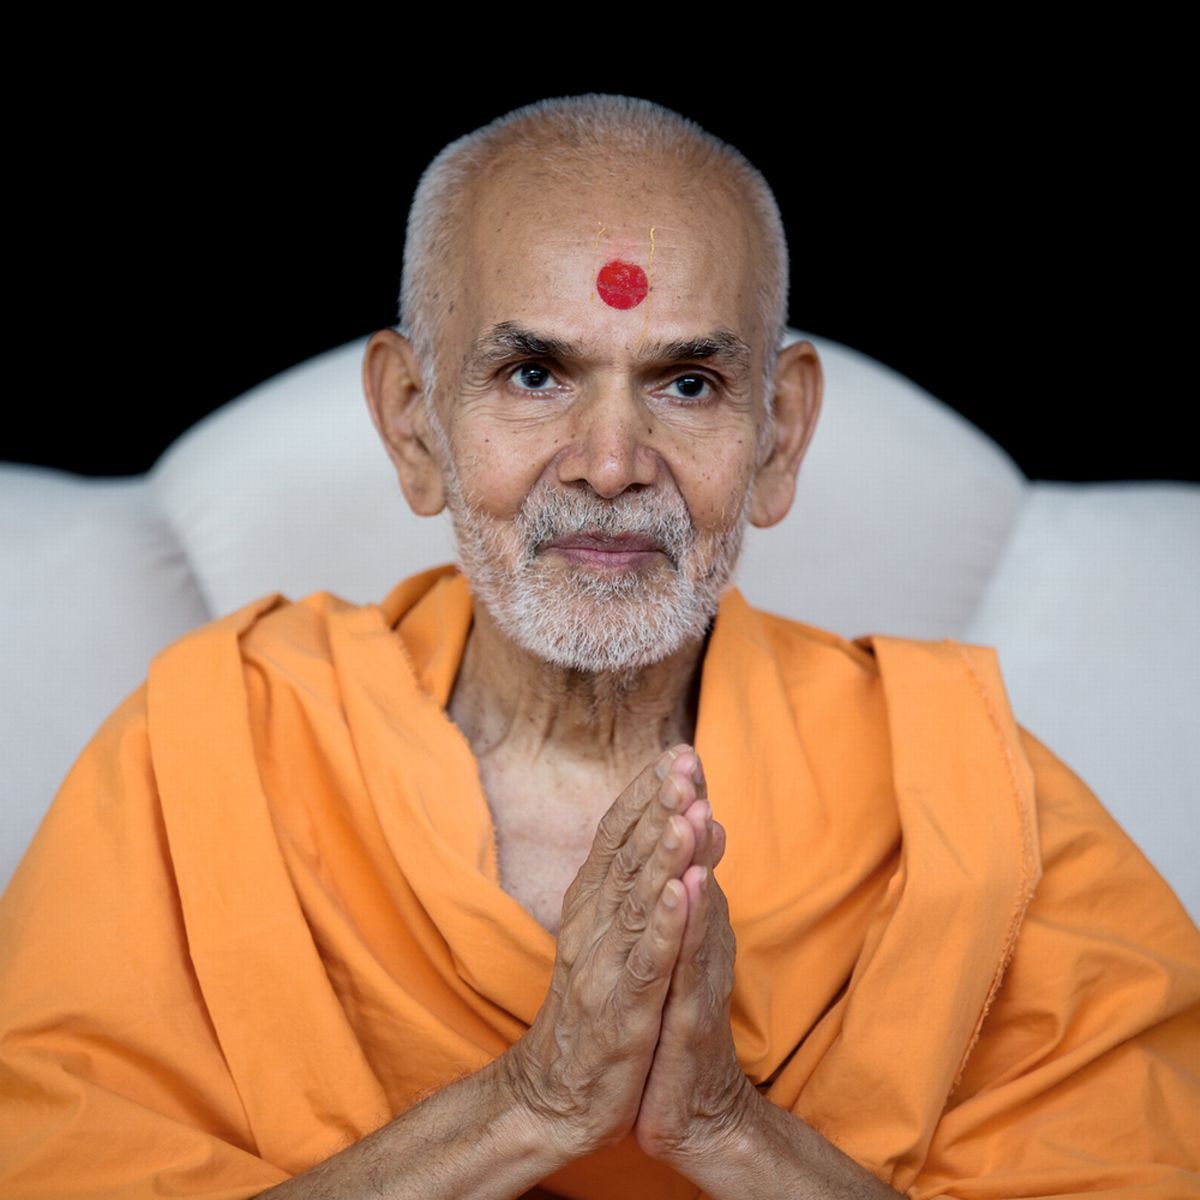 Hindu leader and 'spiritual guide to millions' Mahant Swami Maharaj to visit Leicester ahead of Diwali